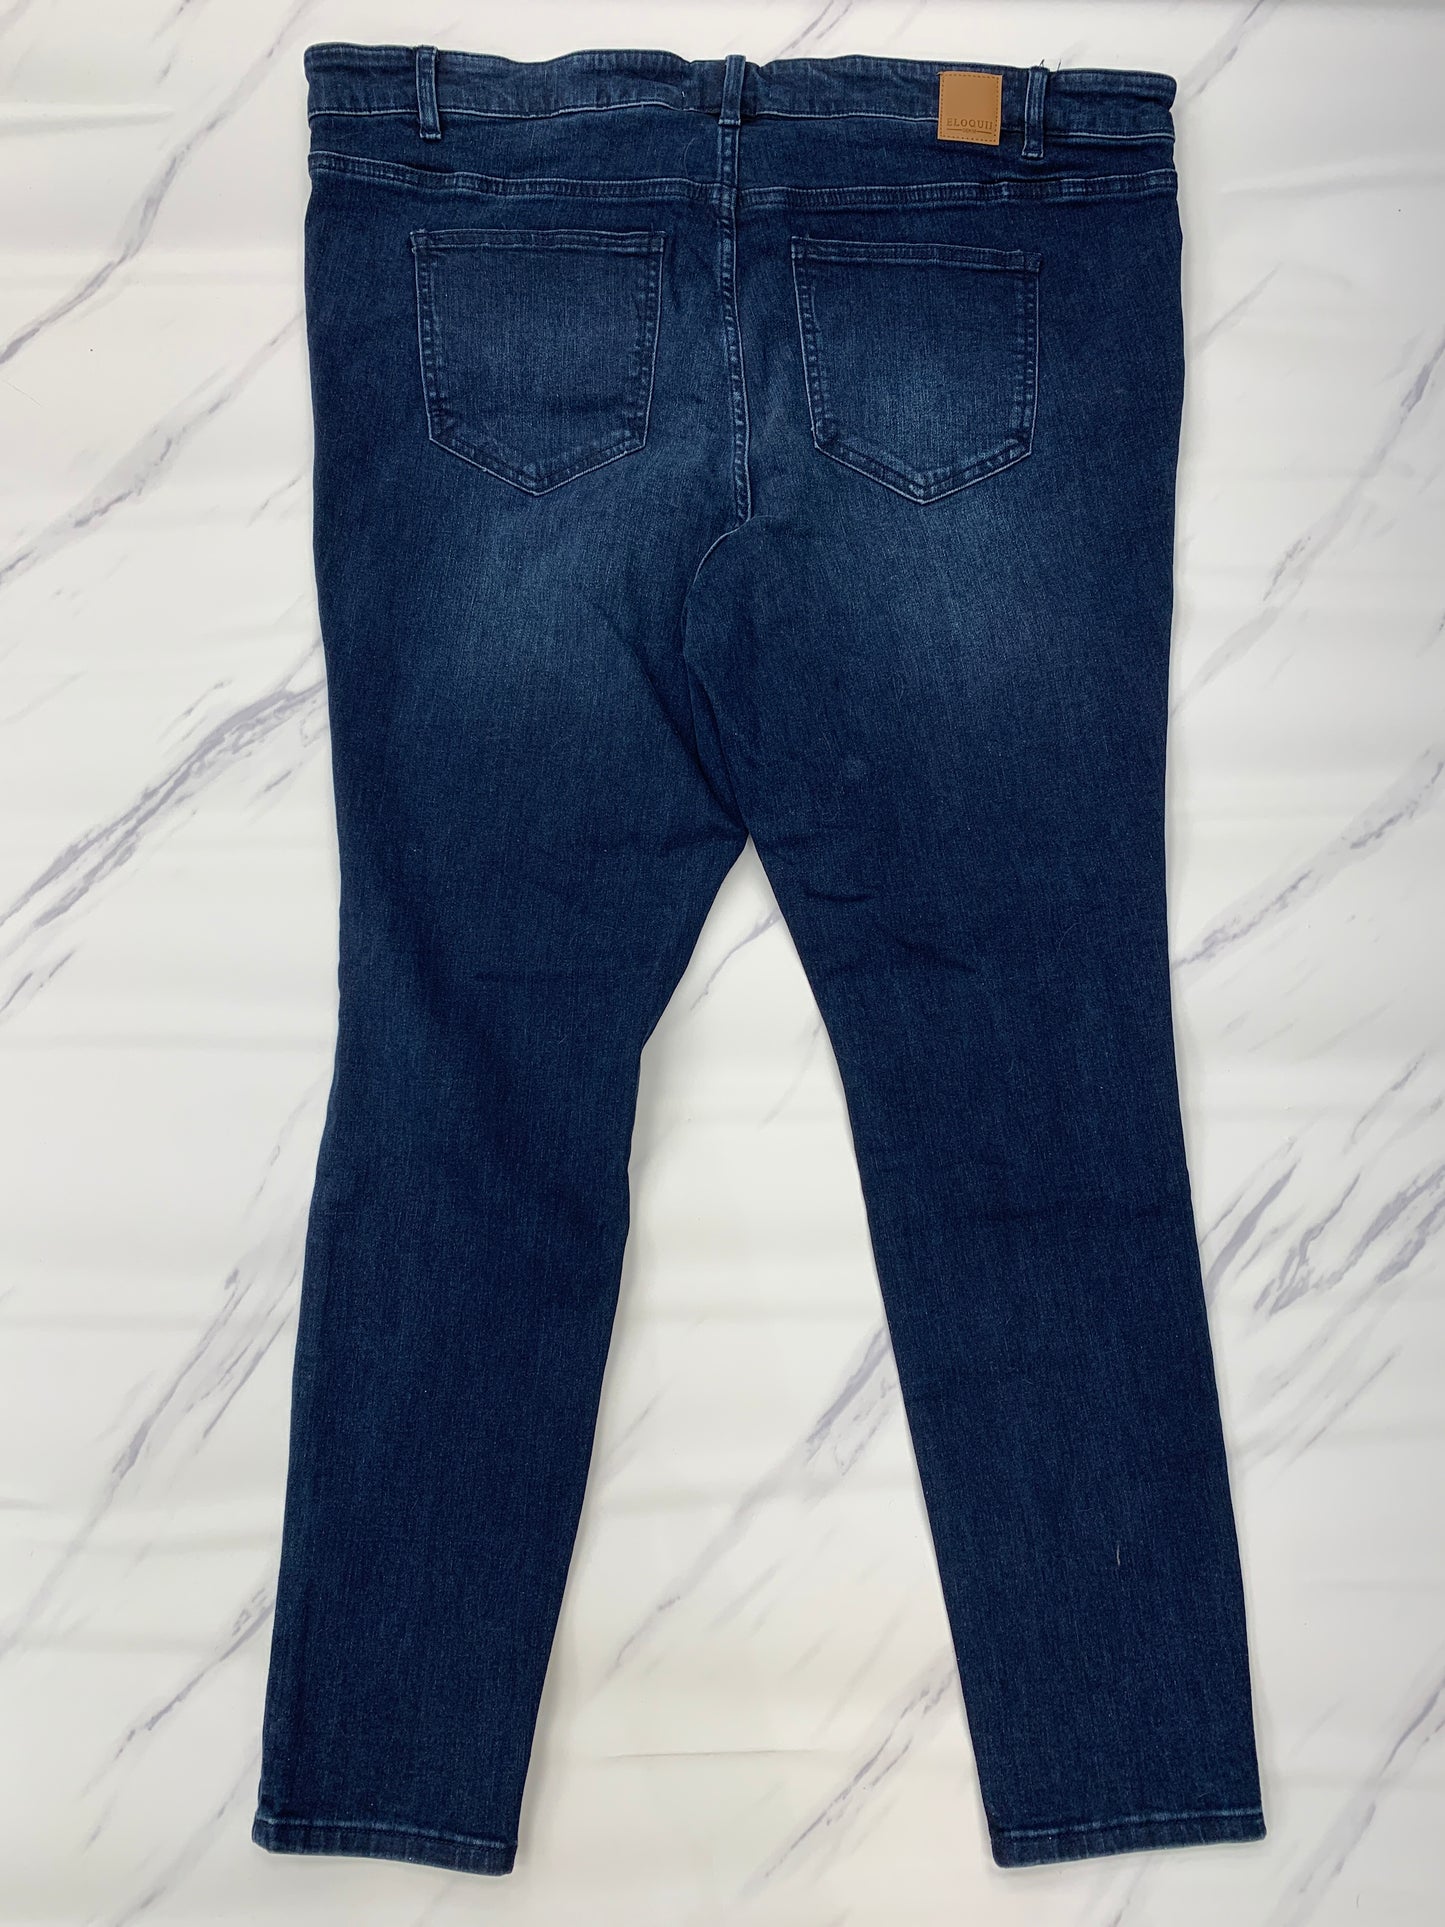 Jeans Skinny By Eloquii  Size: 18